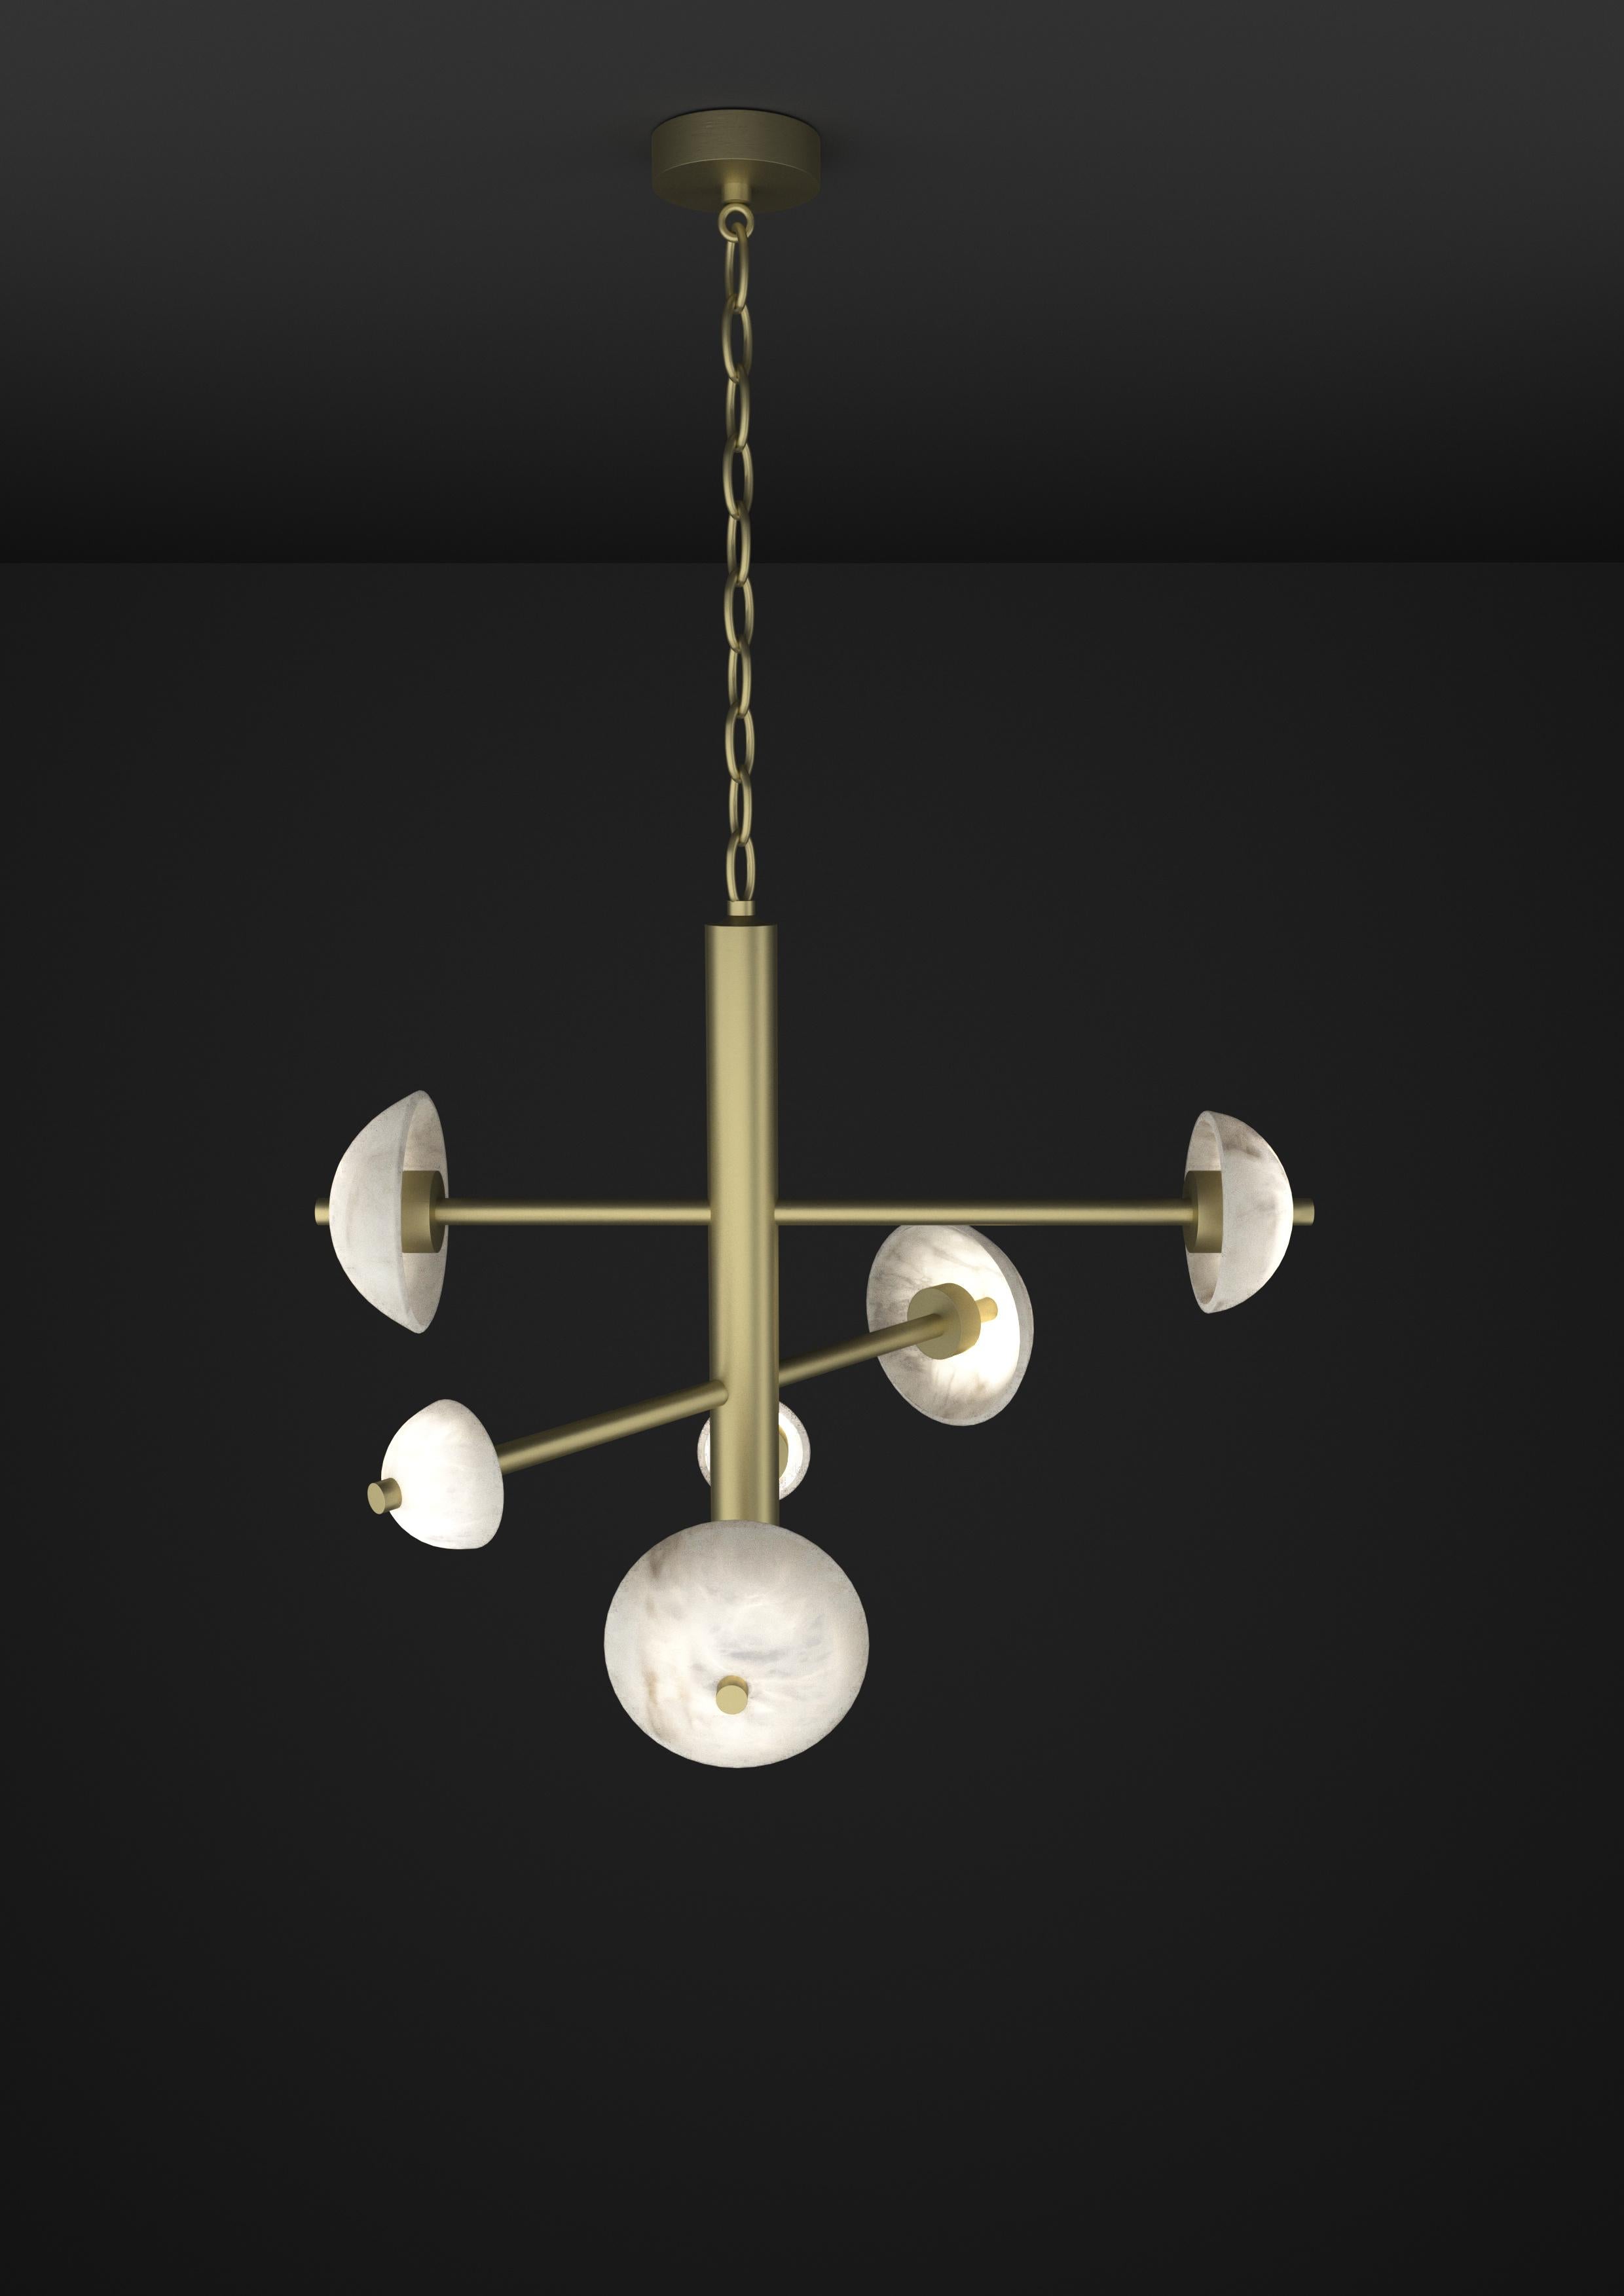 Apollo Brushed Brass Pendant Lamp by Alabastro Italiano
Dimensions: D 70,5 x W 54 x H 64 cm.
Materials: White alabaster and brass.

Available in different finishes: Shiny Silver, Bronze, Brushed Brass, Ruggine of Florence, Brushed Burnished, Shiny